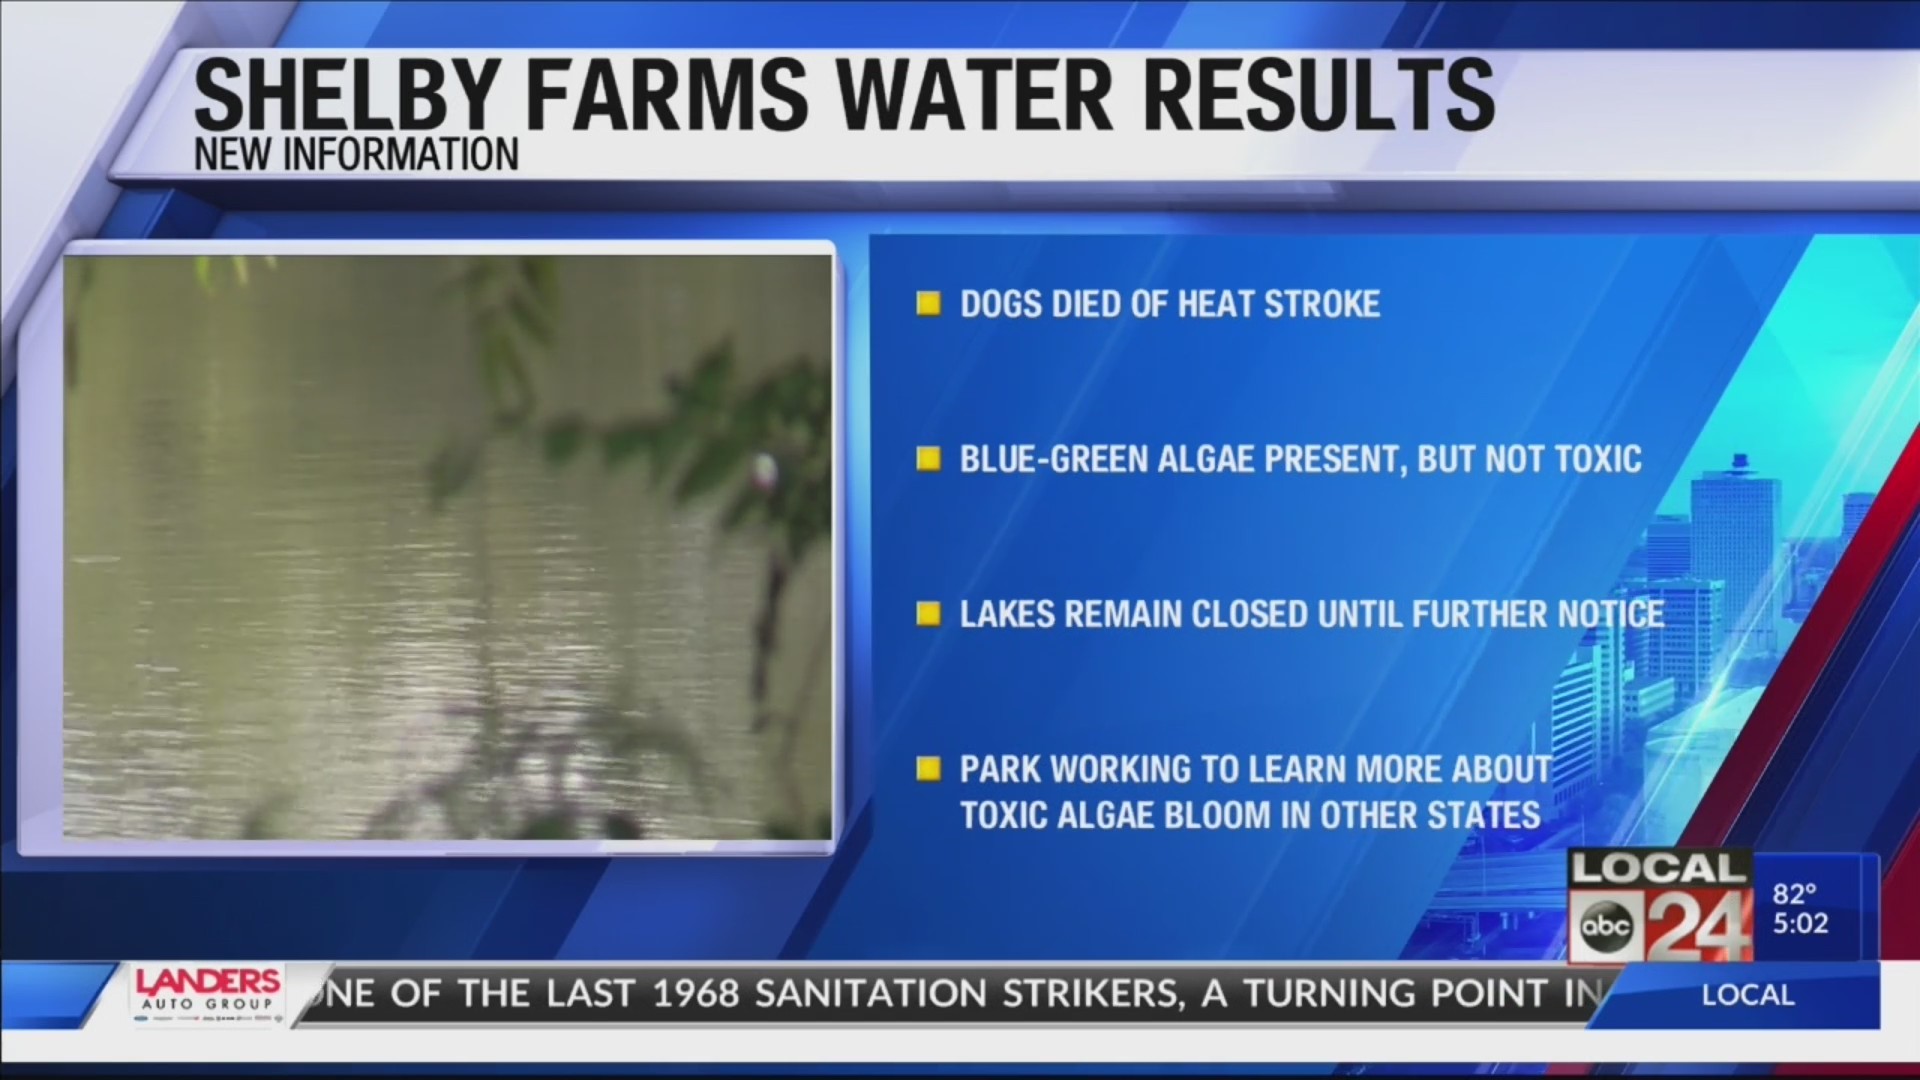 Shelby Farms Park releases results of recent water testing and cause of death in 2 dogs